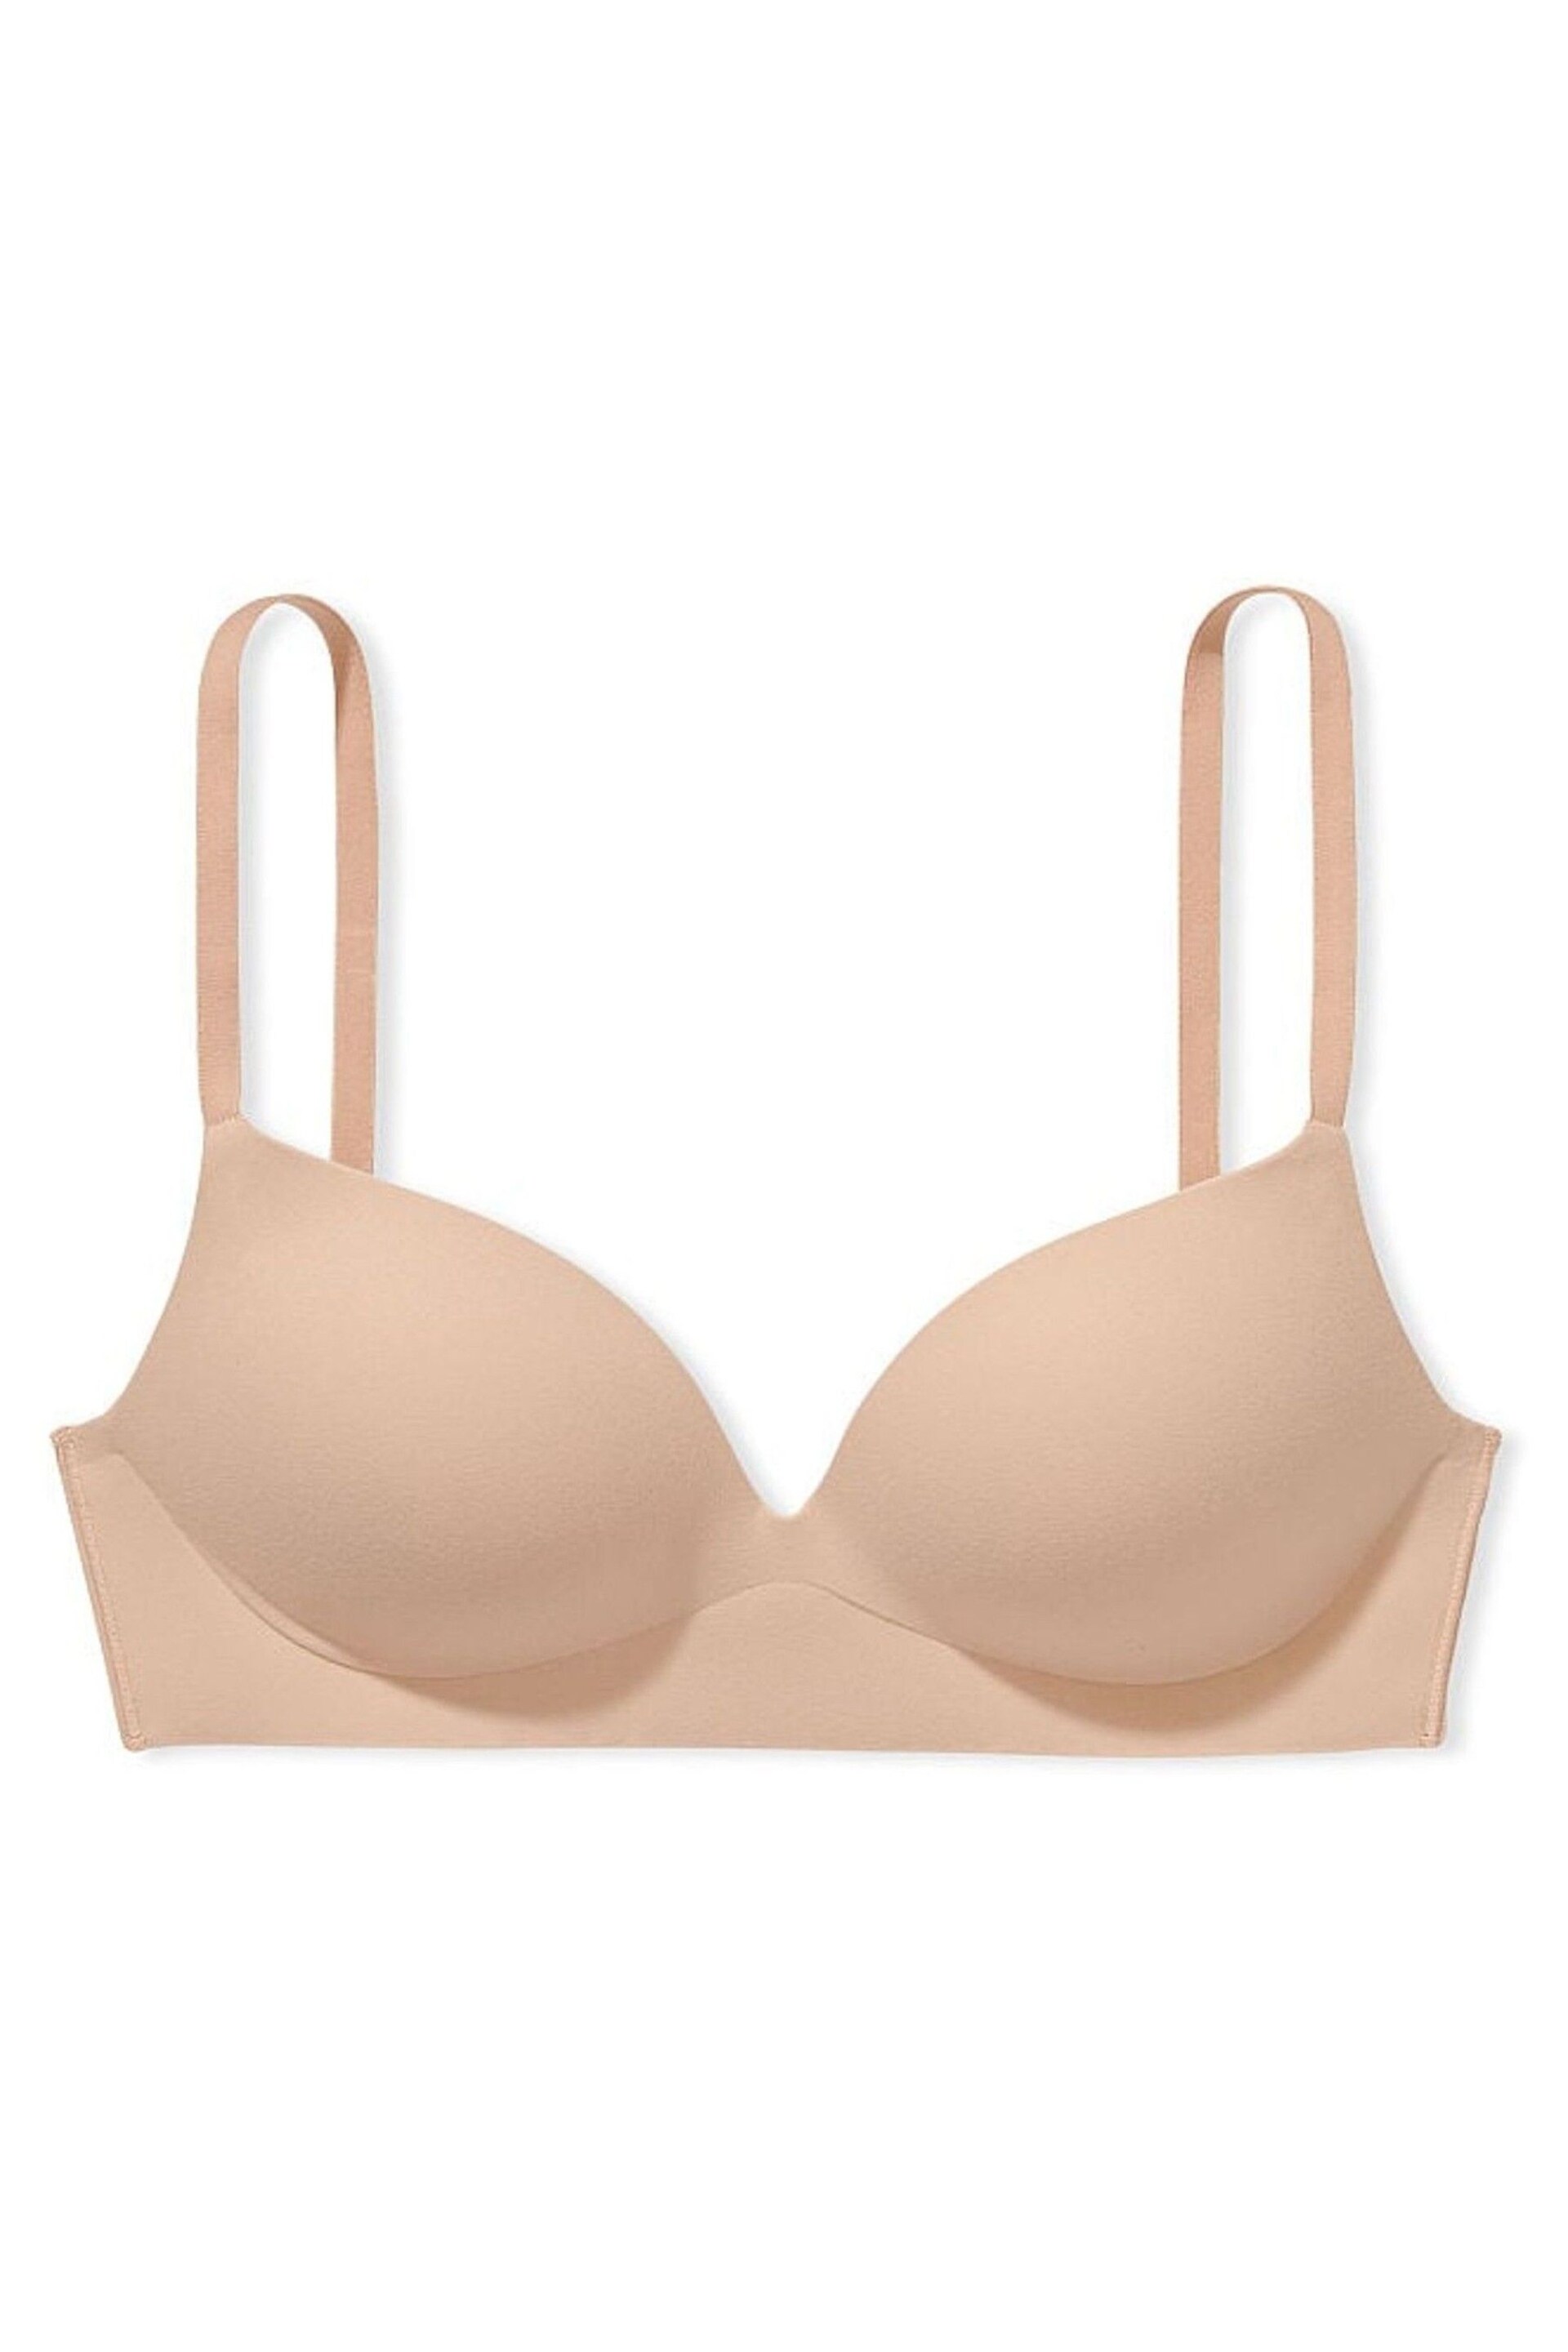 Victoria's Secret Toasted Sugar Nude Smooth Non Wired Push Up Bra - Image 3 of 3